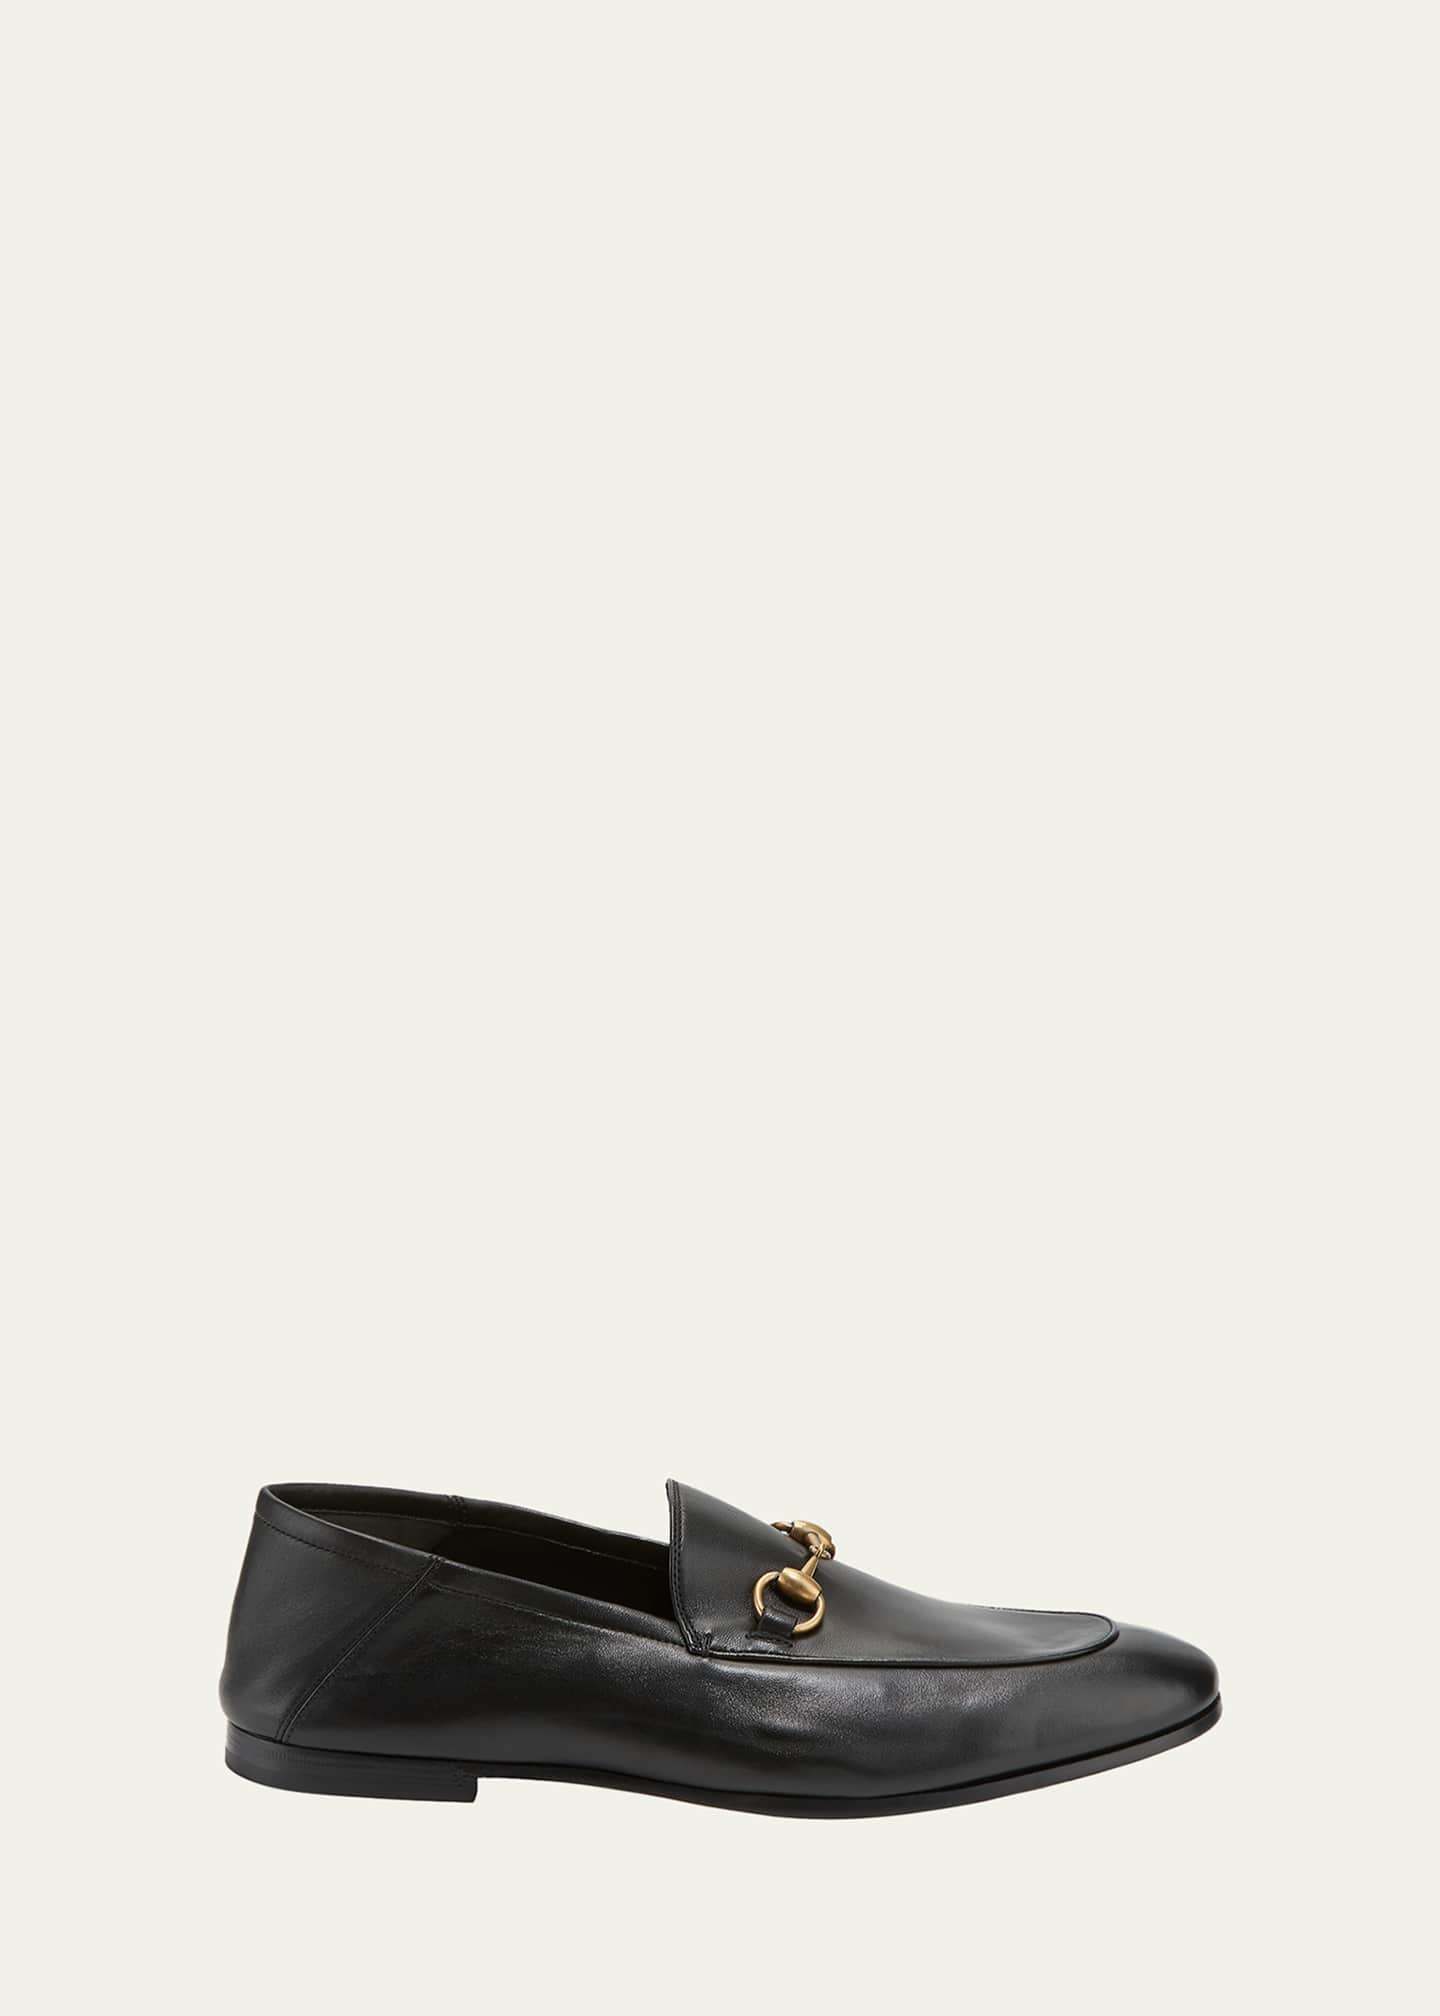 Gucci Soft Leather Bit-Strap Loafer Image 1 of 5